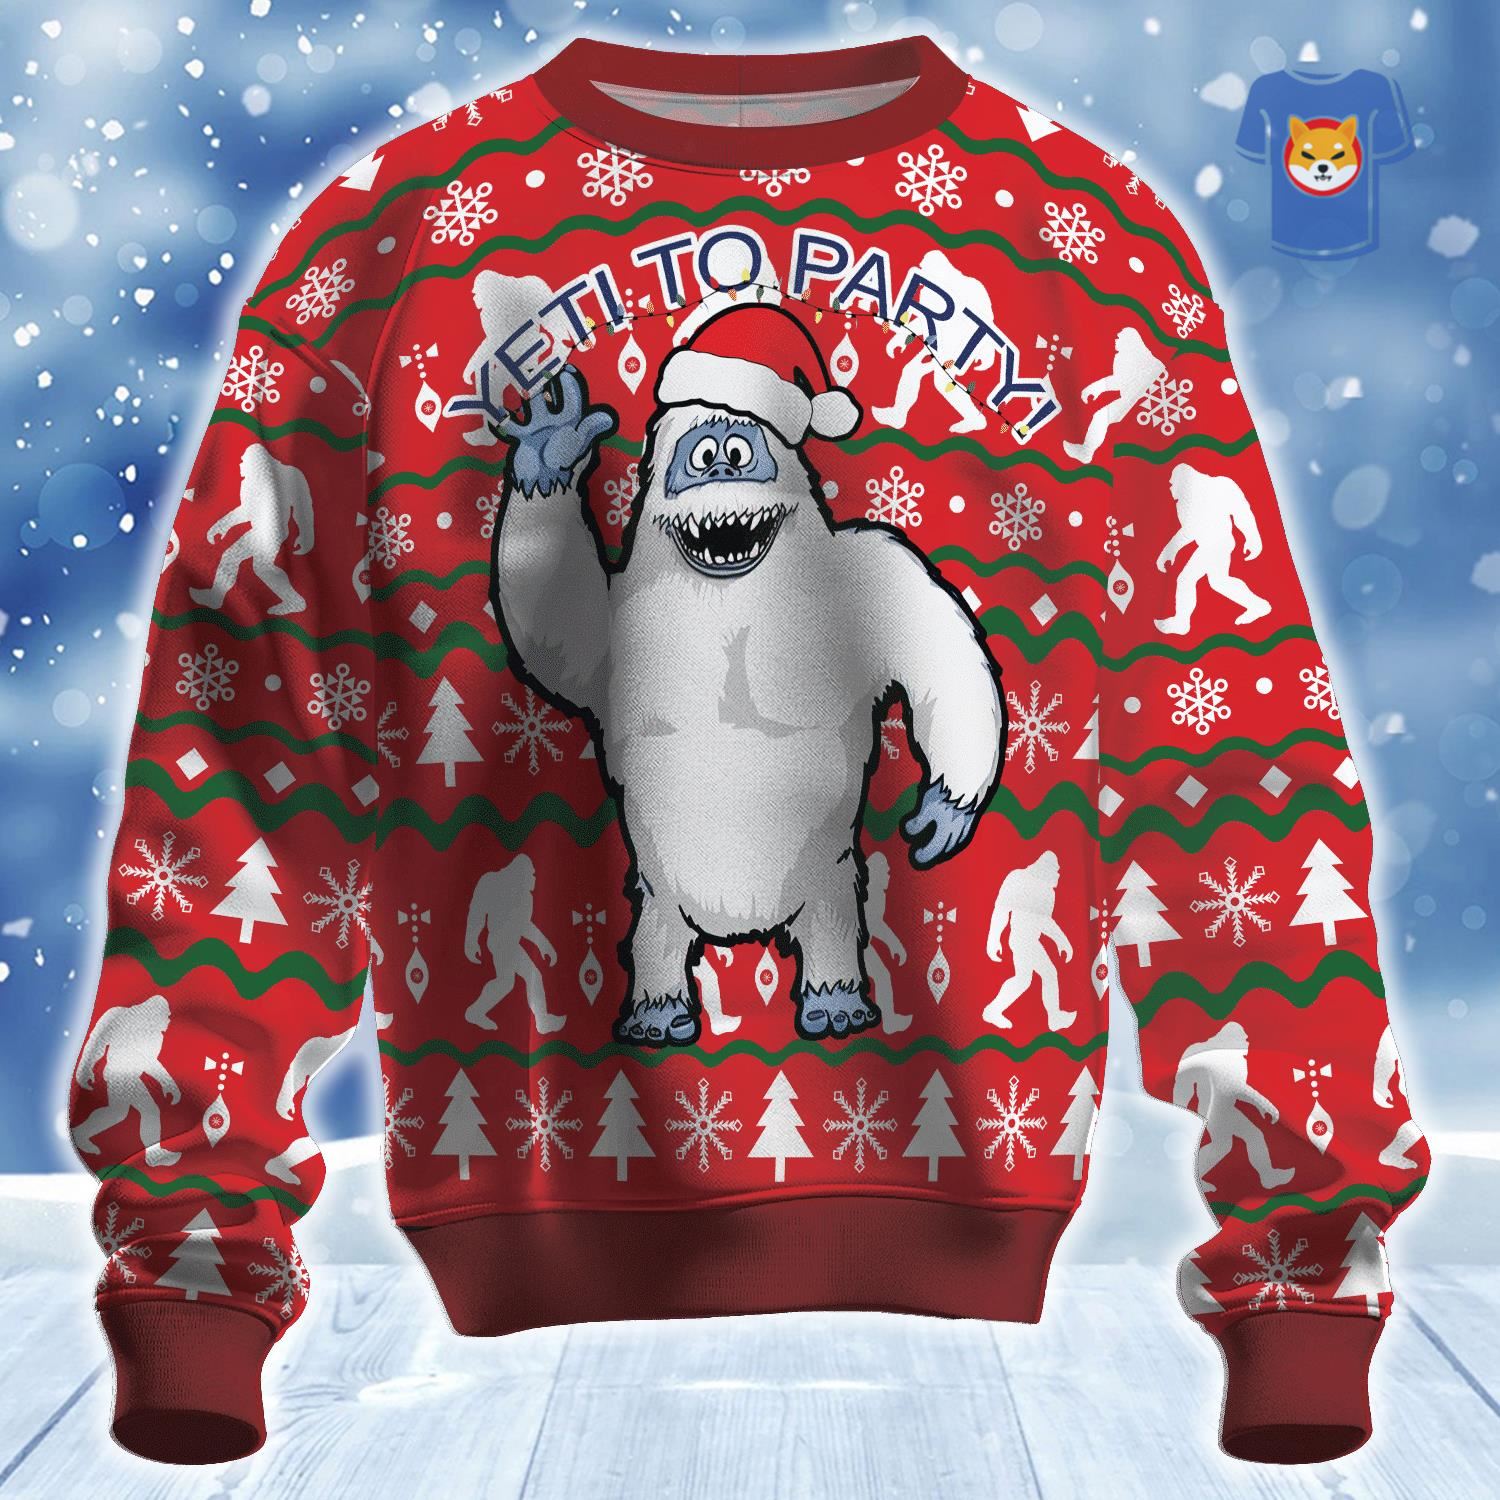 Yeti To Party Ugly Christmas Sweater 